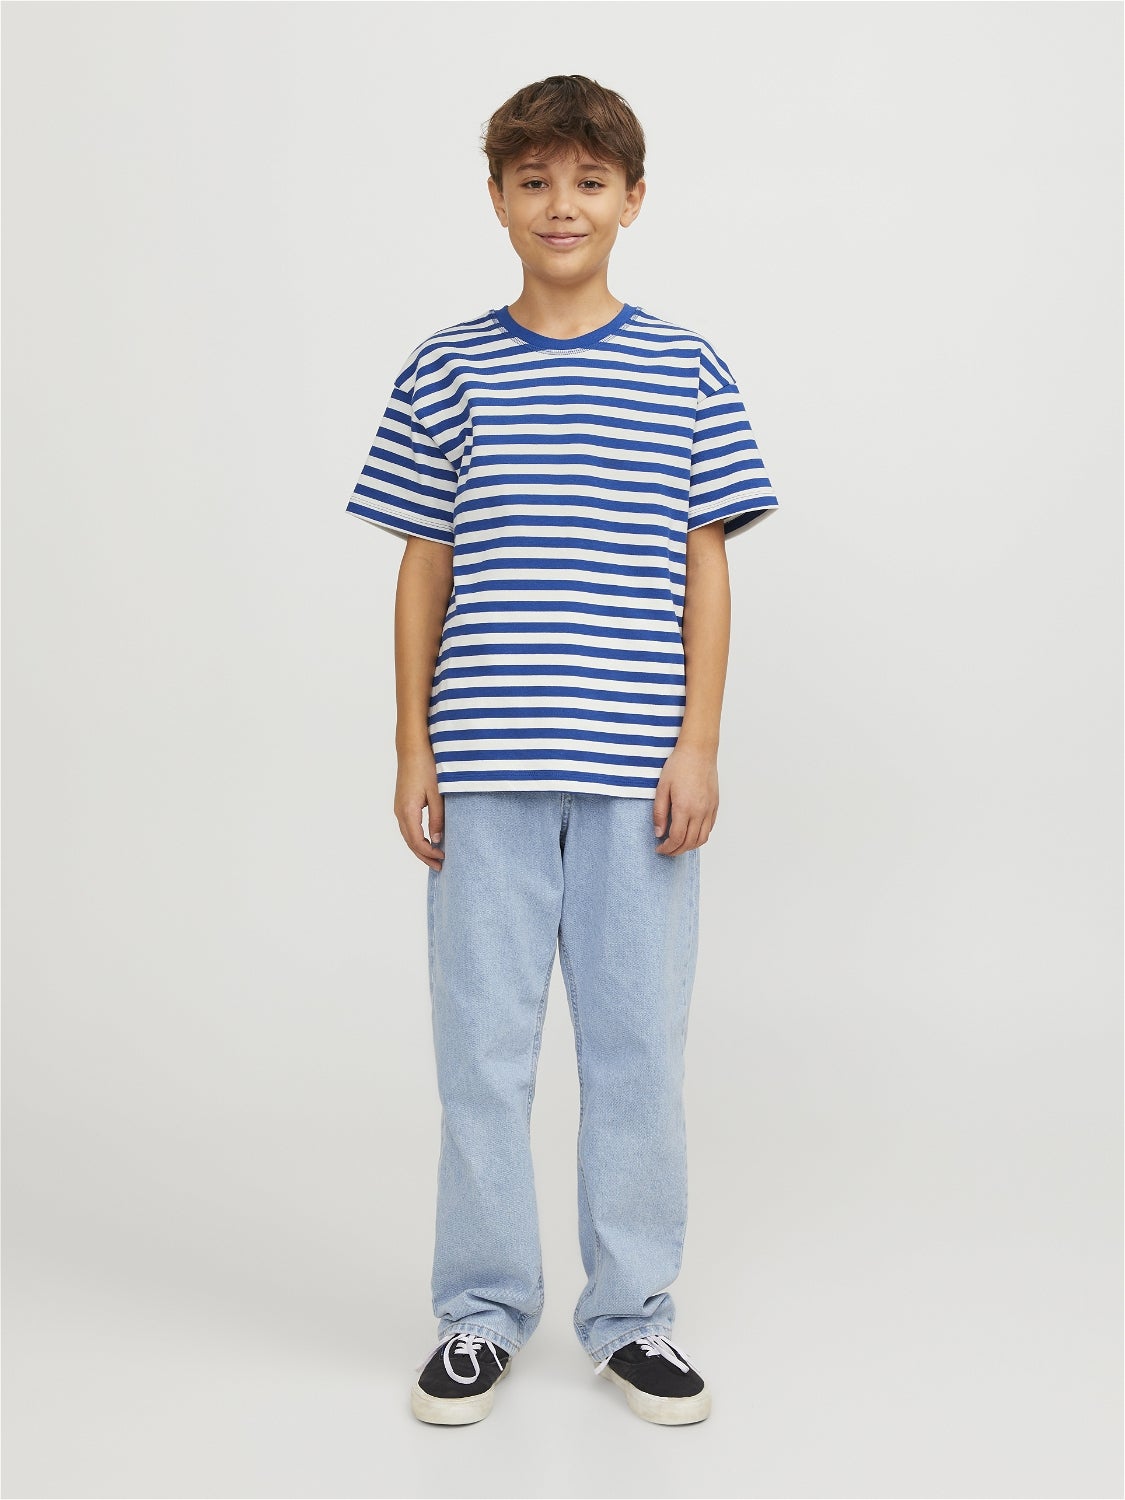 Striped T-shirt For boys